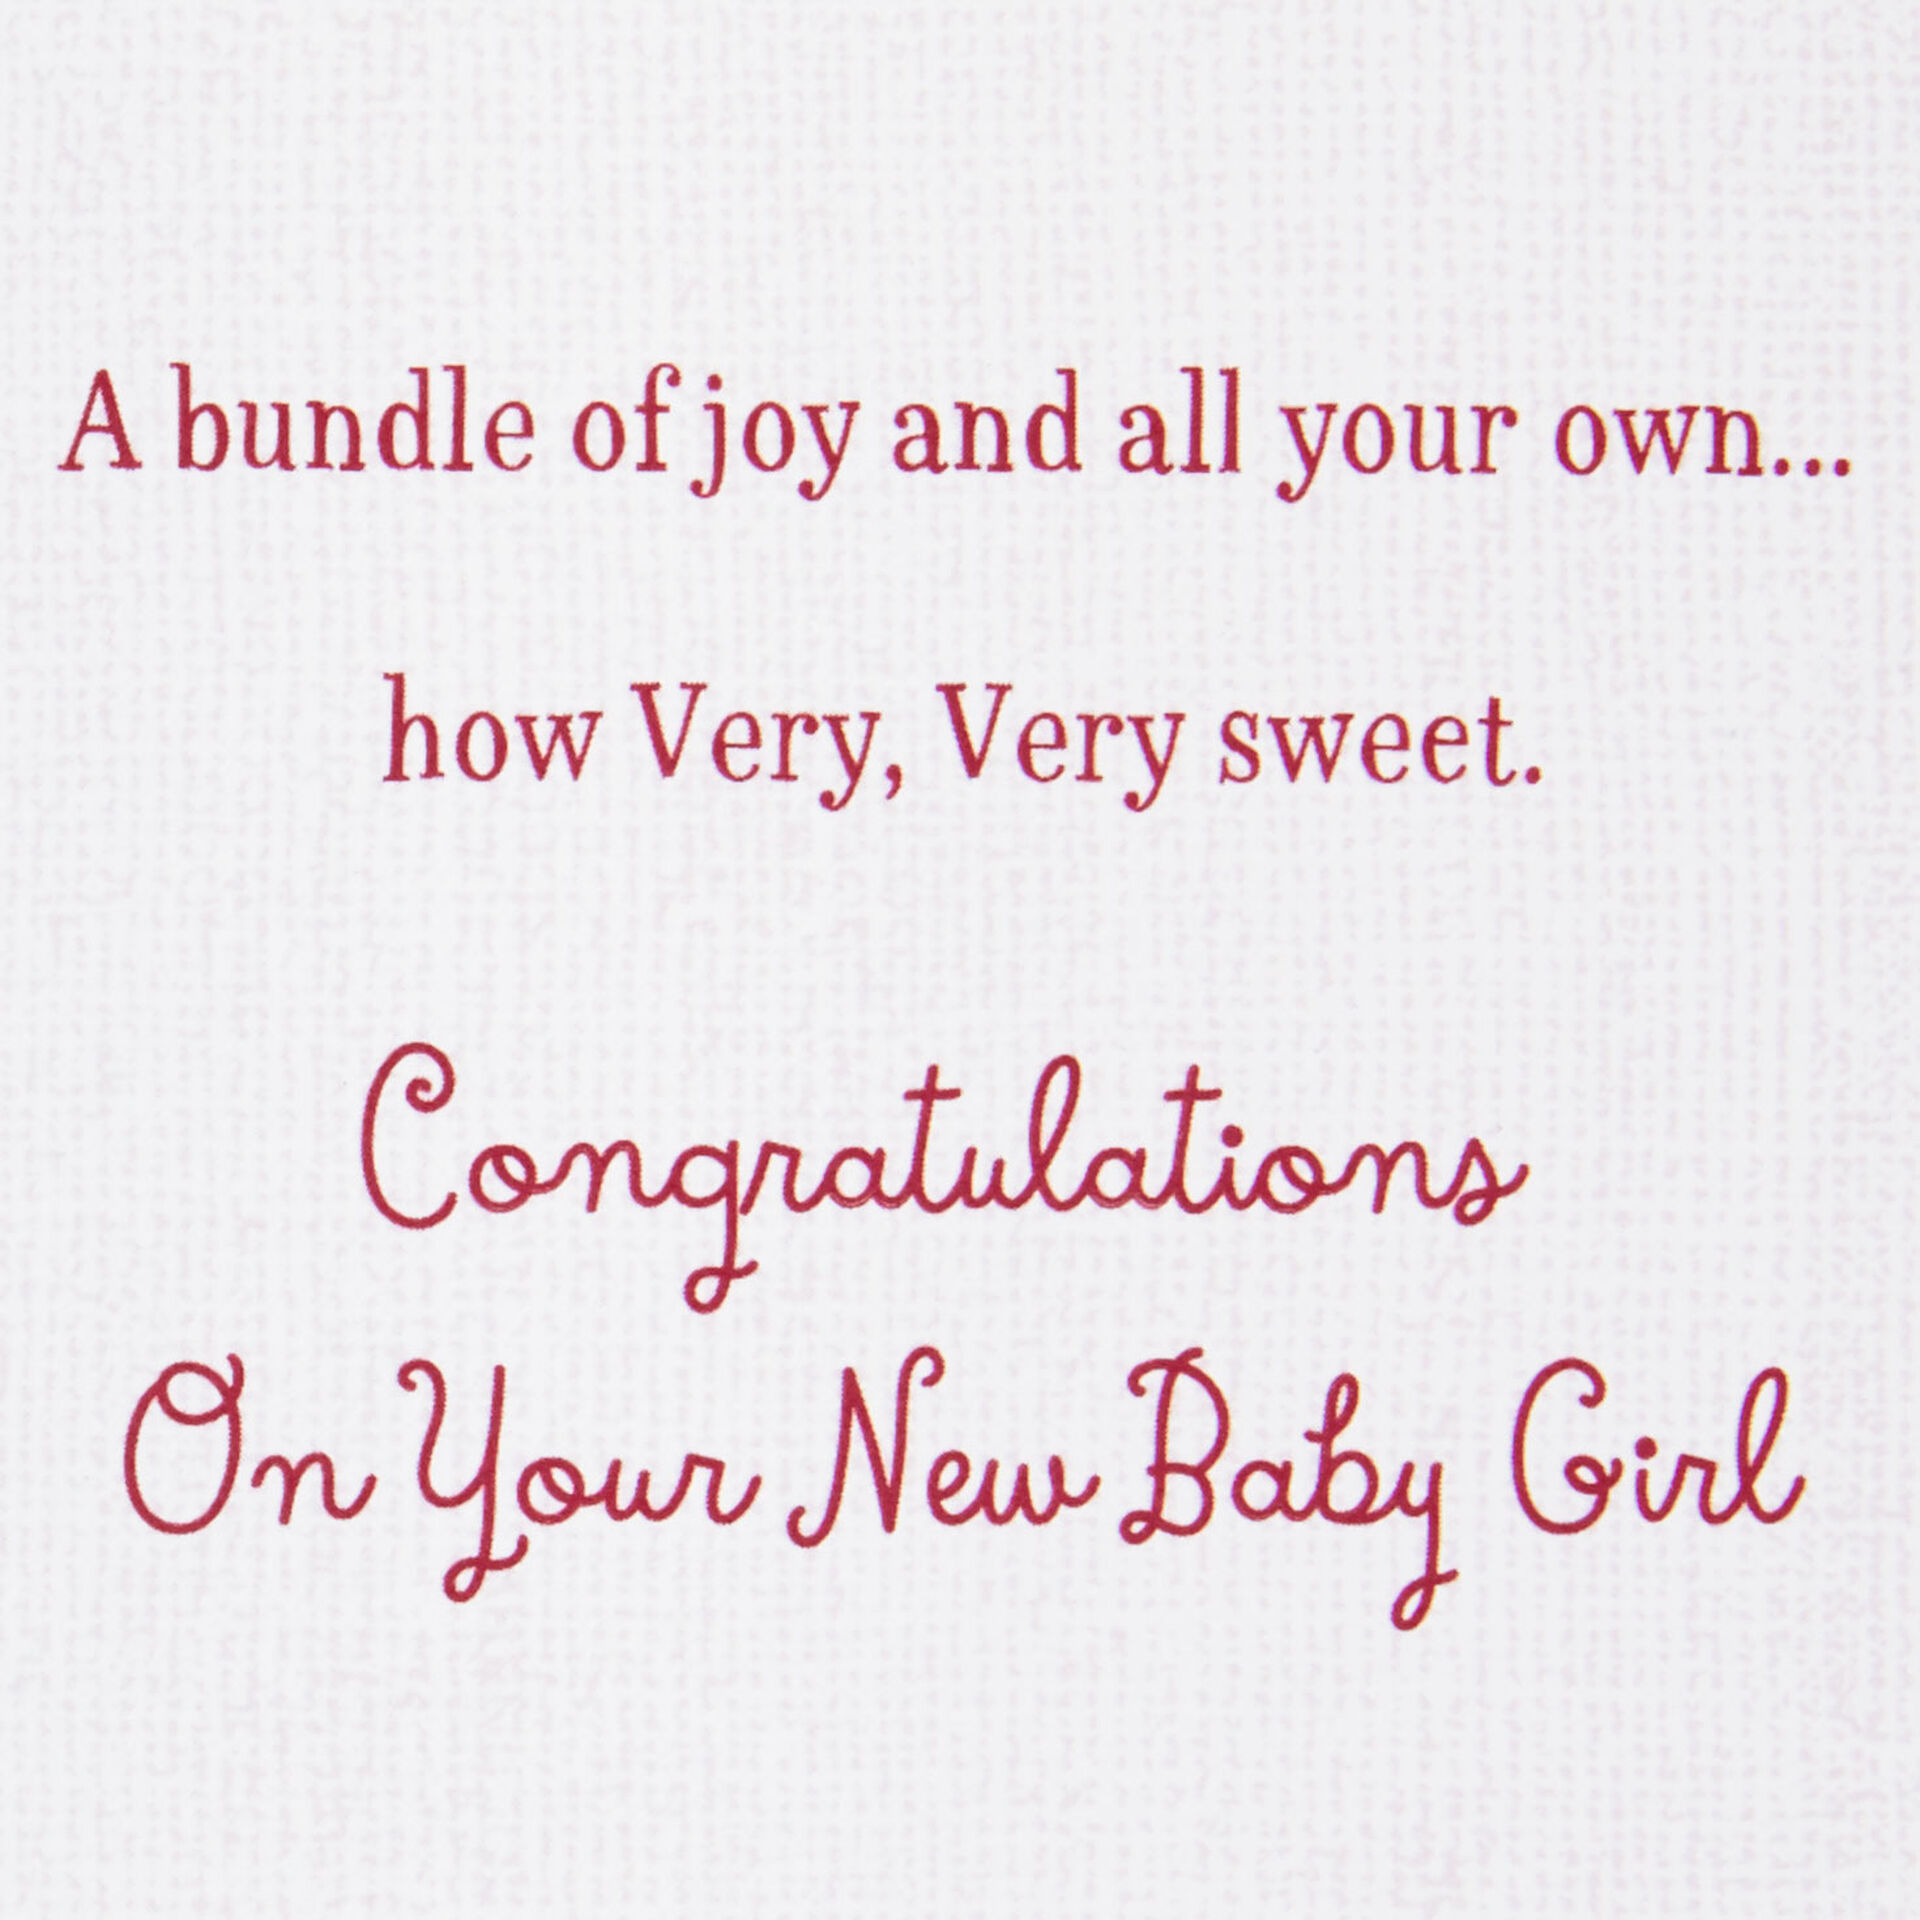 Winnie-the-Pooh-Hugging-Piglet-New-Baby-Girl-Card_499G2335_02